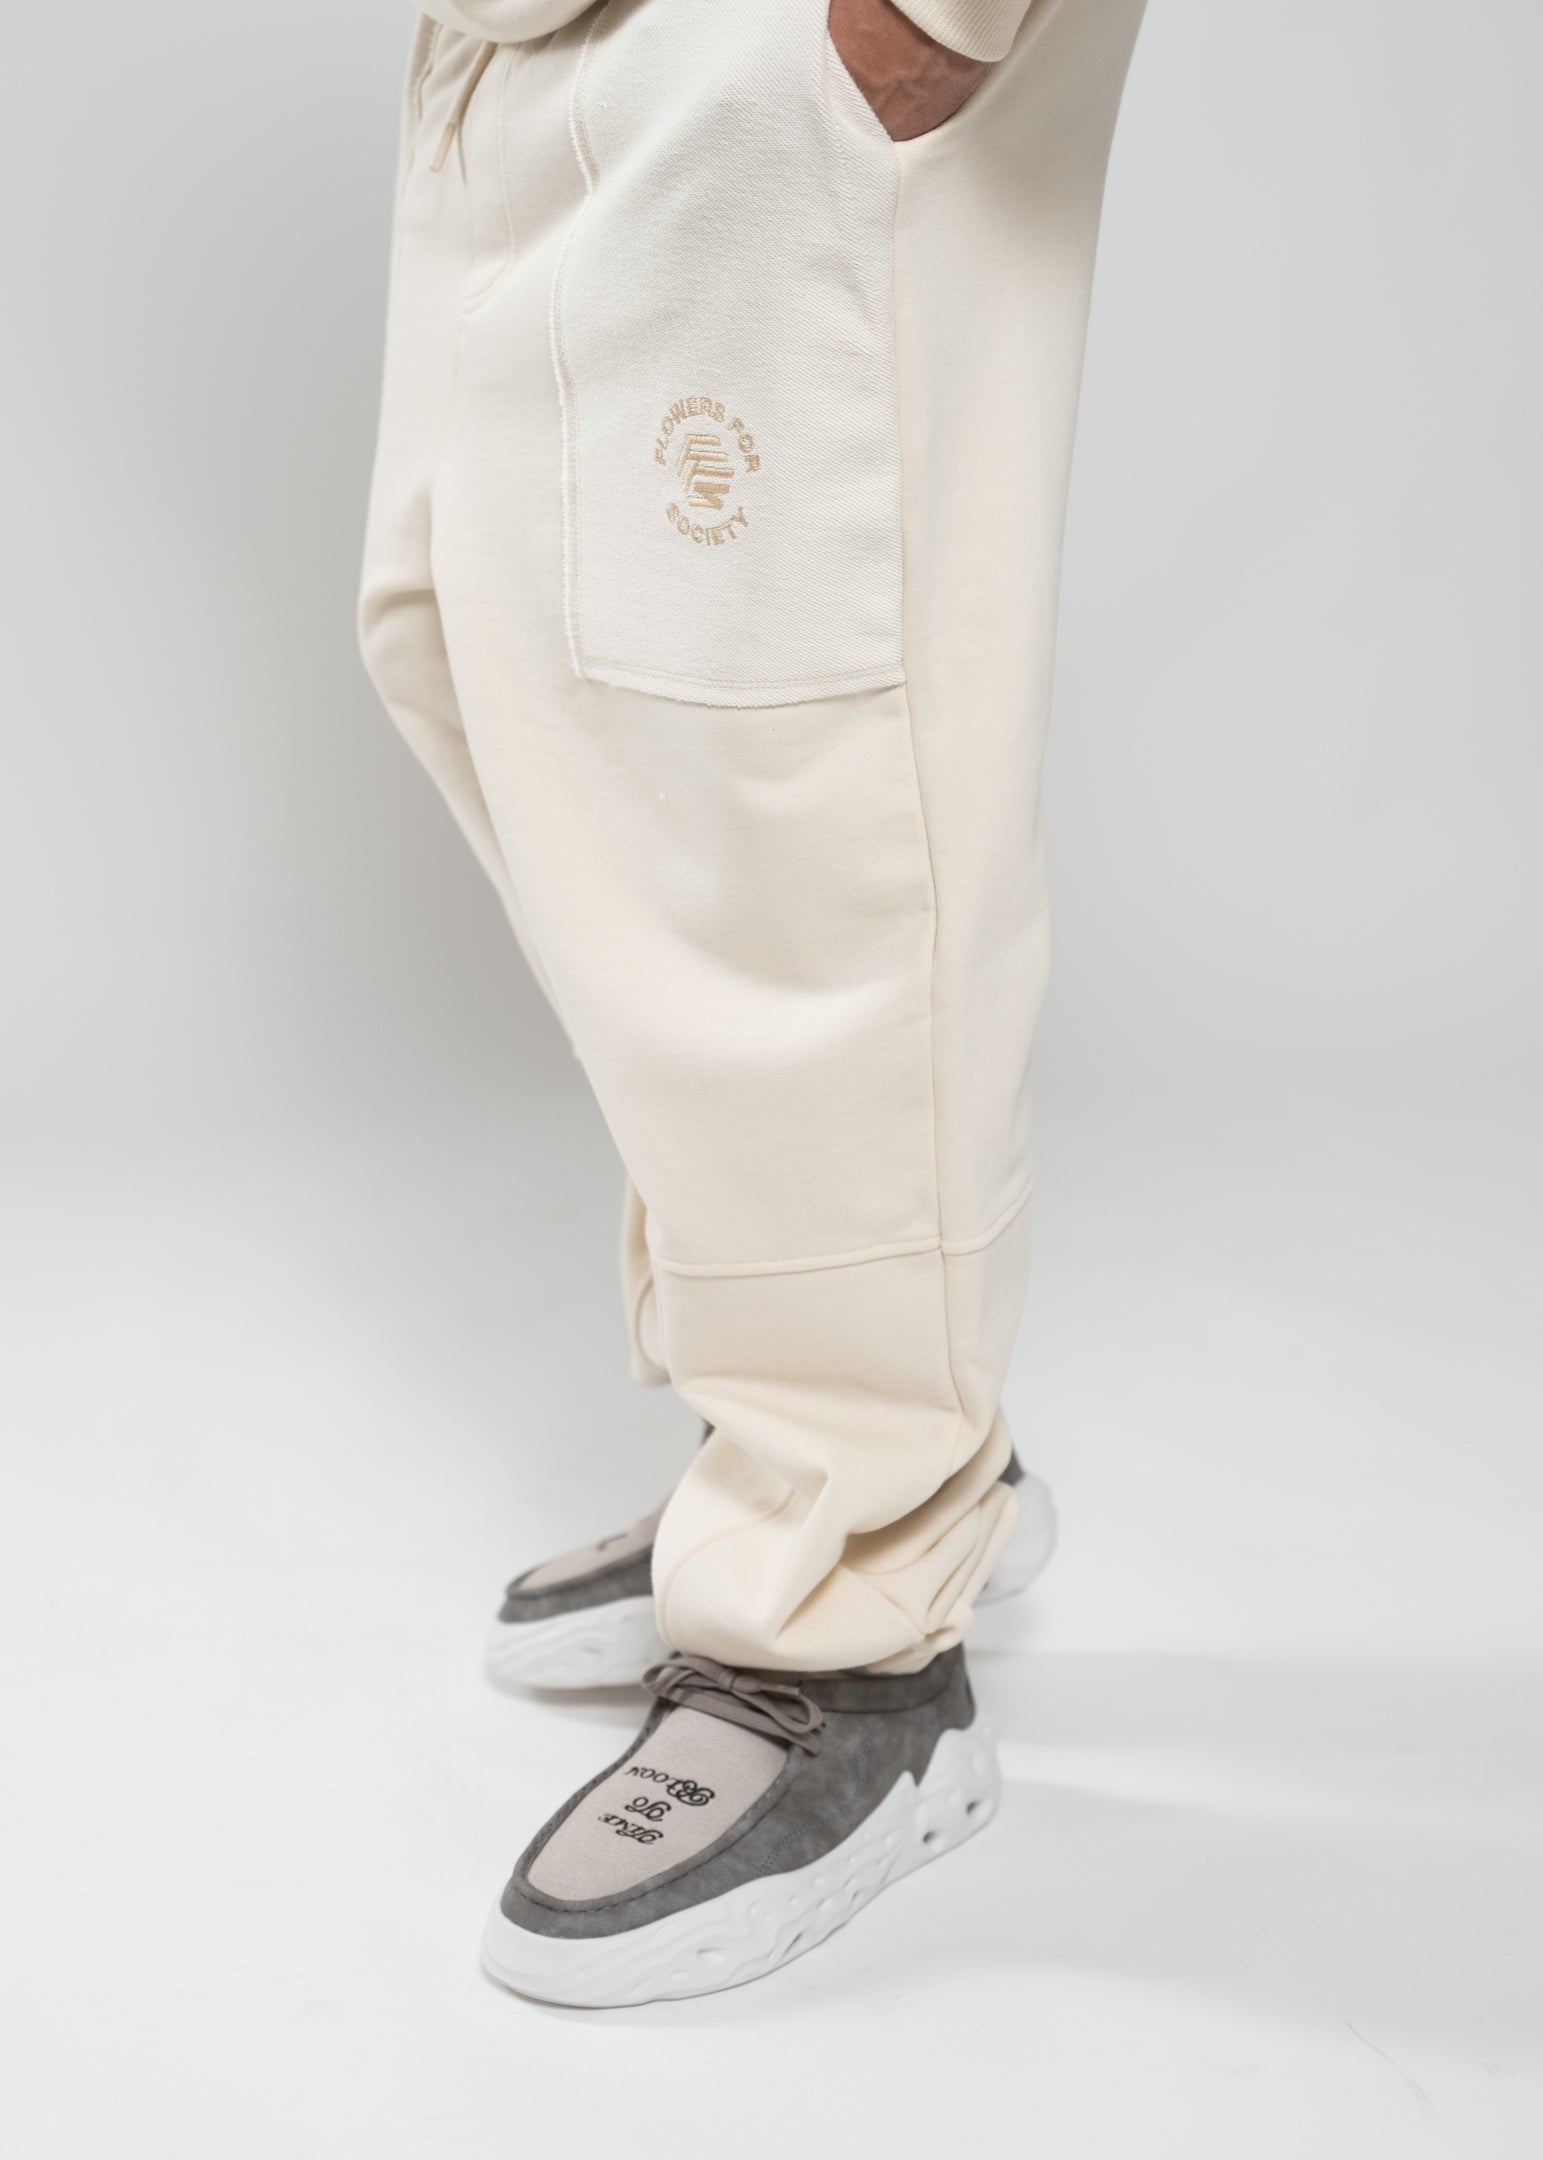 Flowers for Society Basic Jogger pant off white sideview worn by model Ben standing